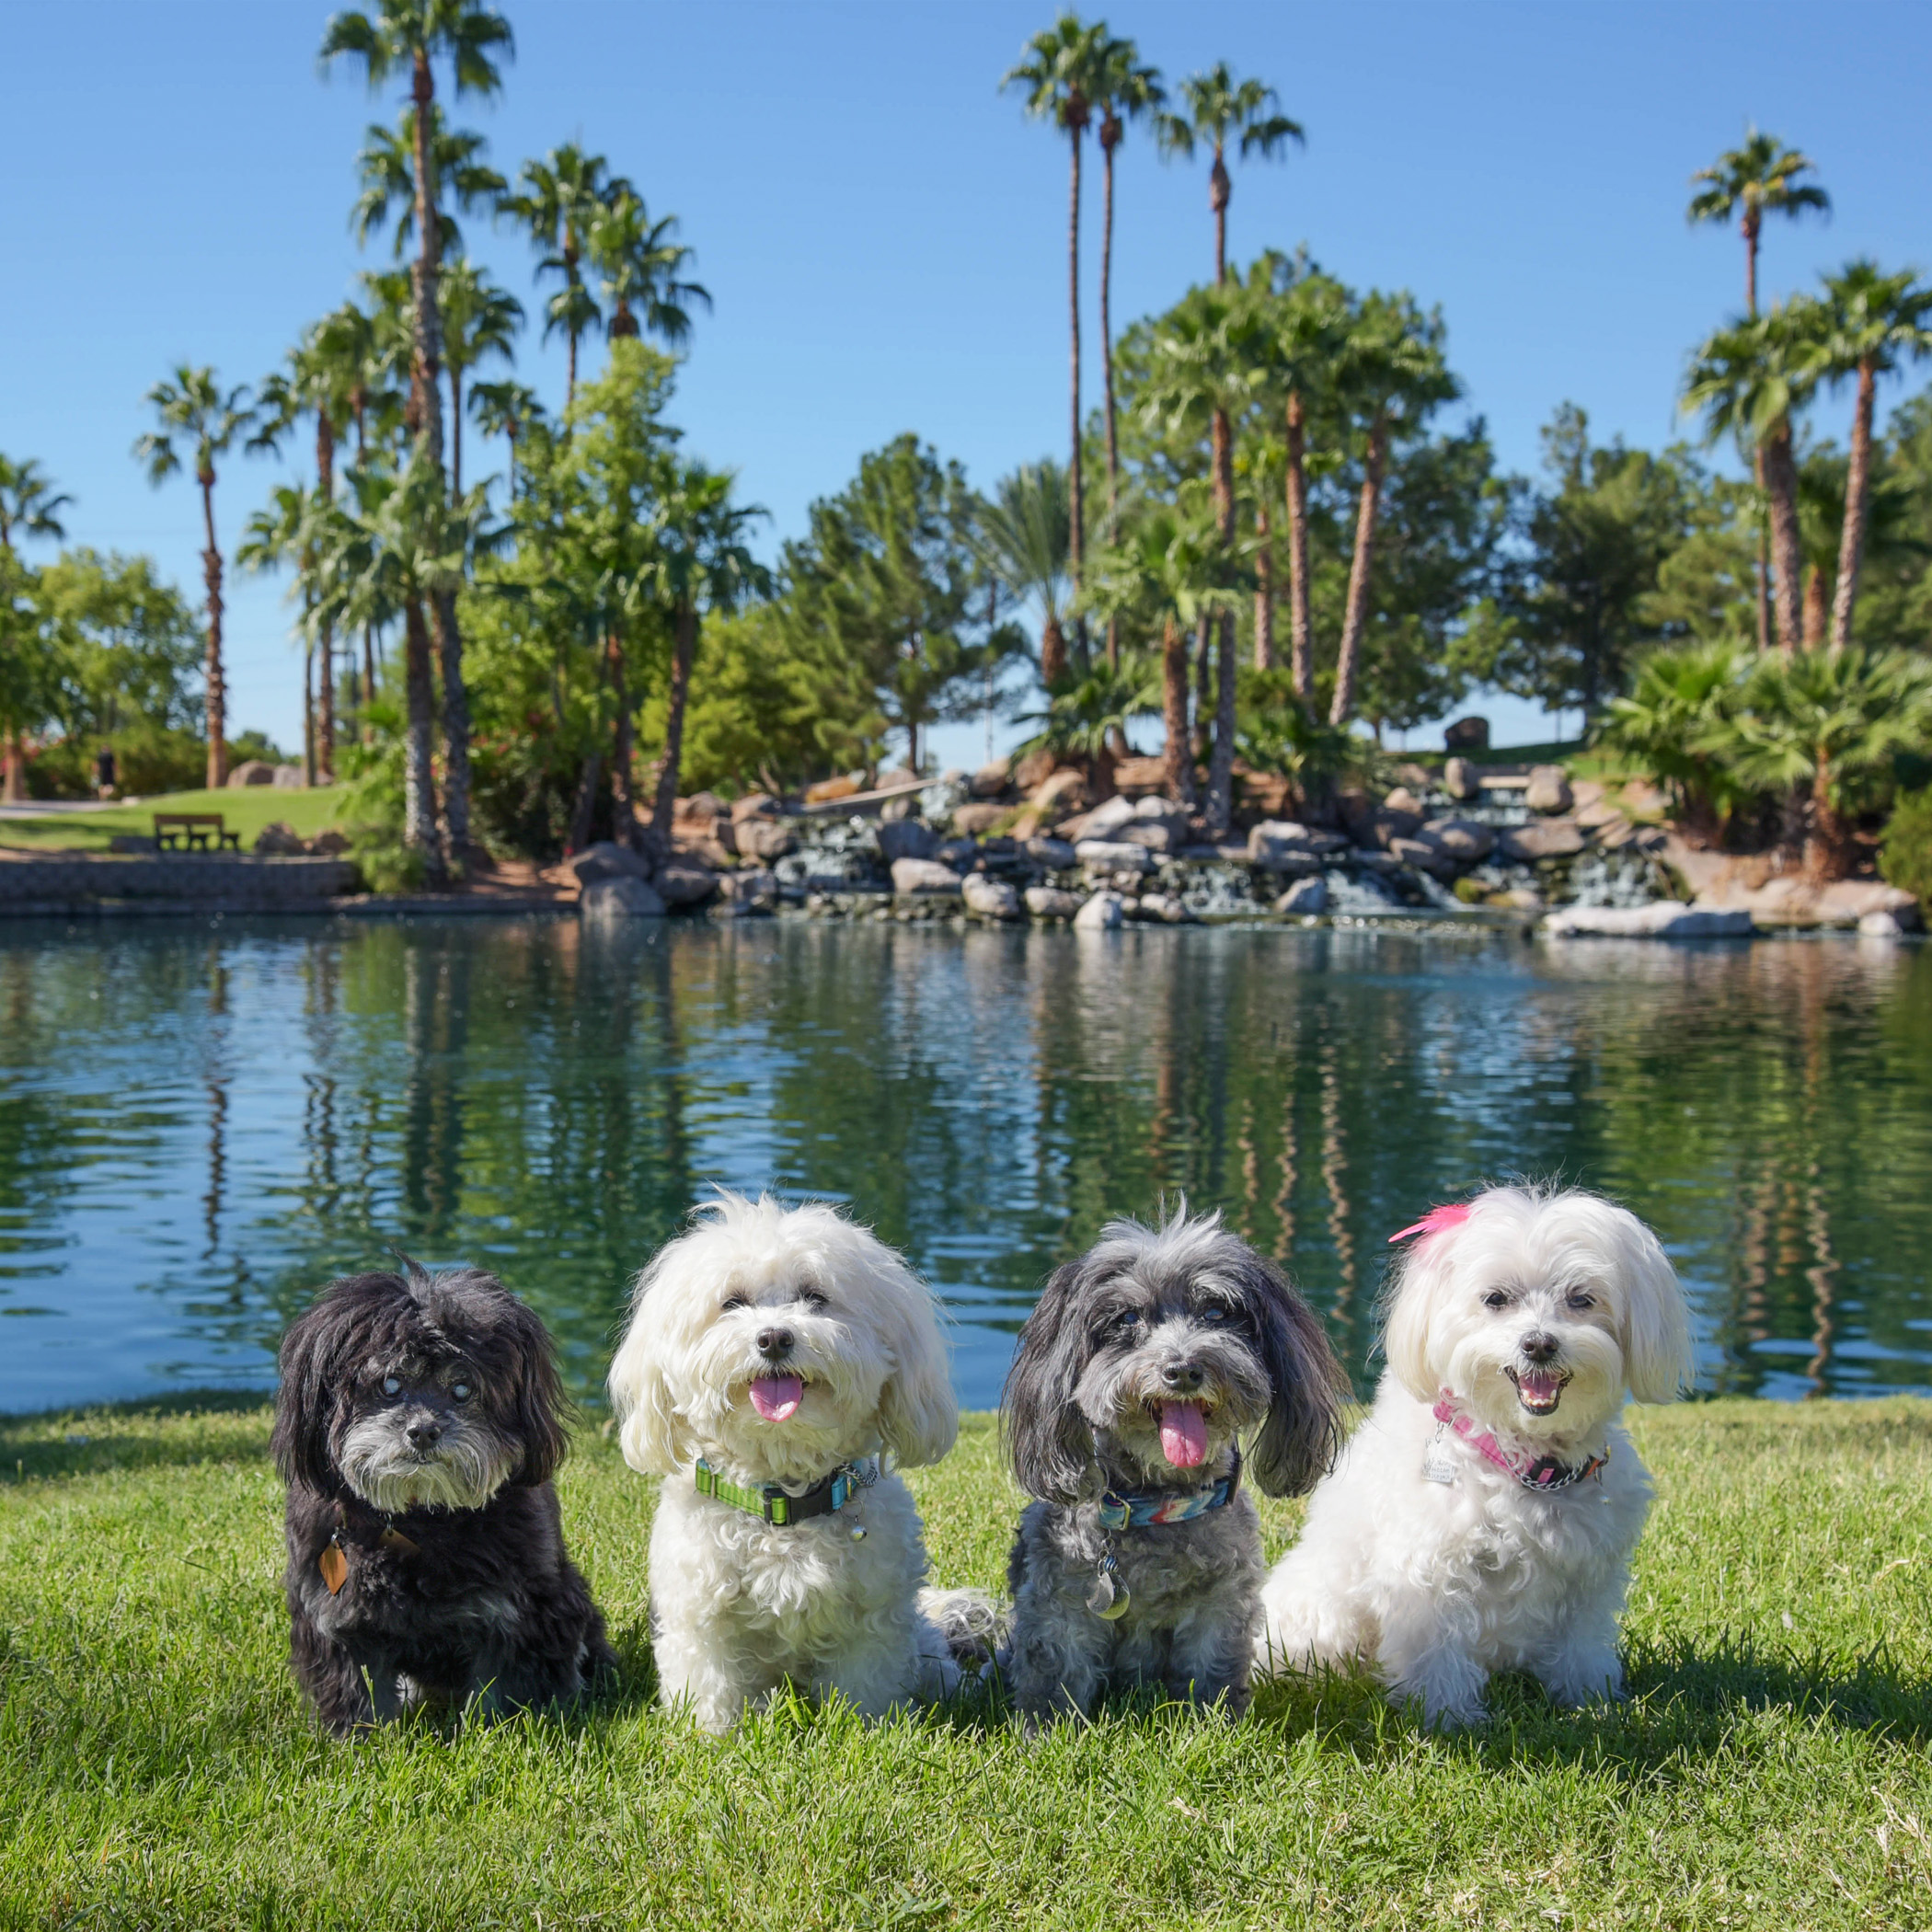  Doesn’t it look like we are in paradise?!? We are so blessed to be able to experience such beauty and happiness! We wish and dream that every doggie in this big wide world will have the opportunity to experience something just as beautiful and be fi